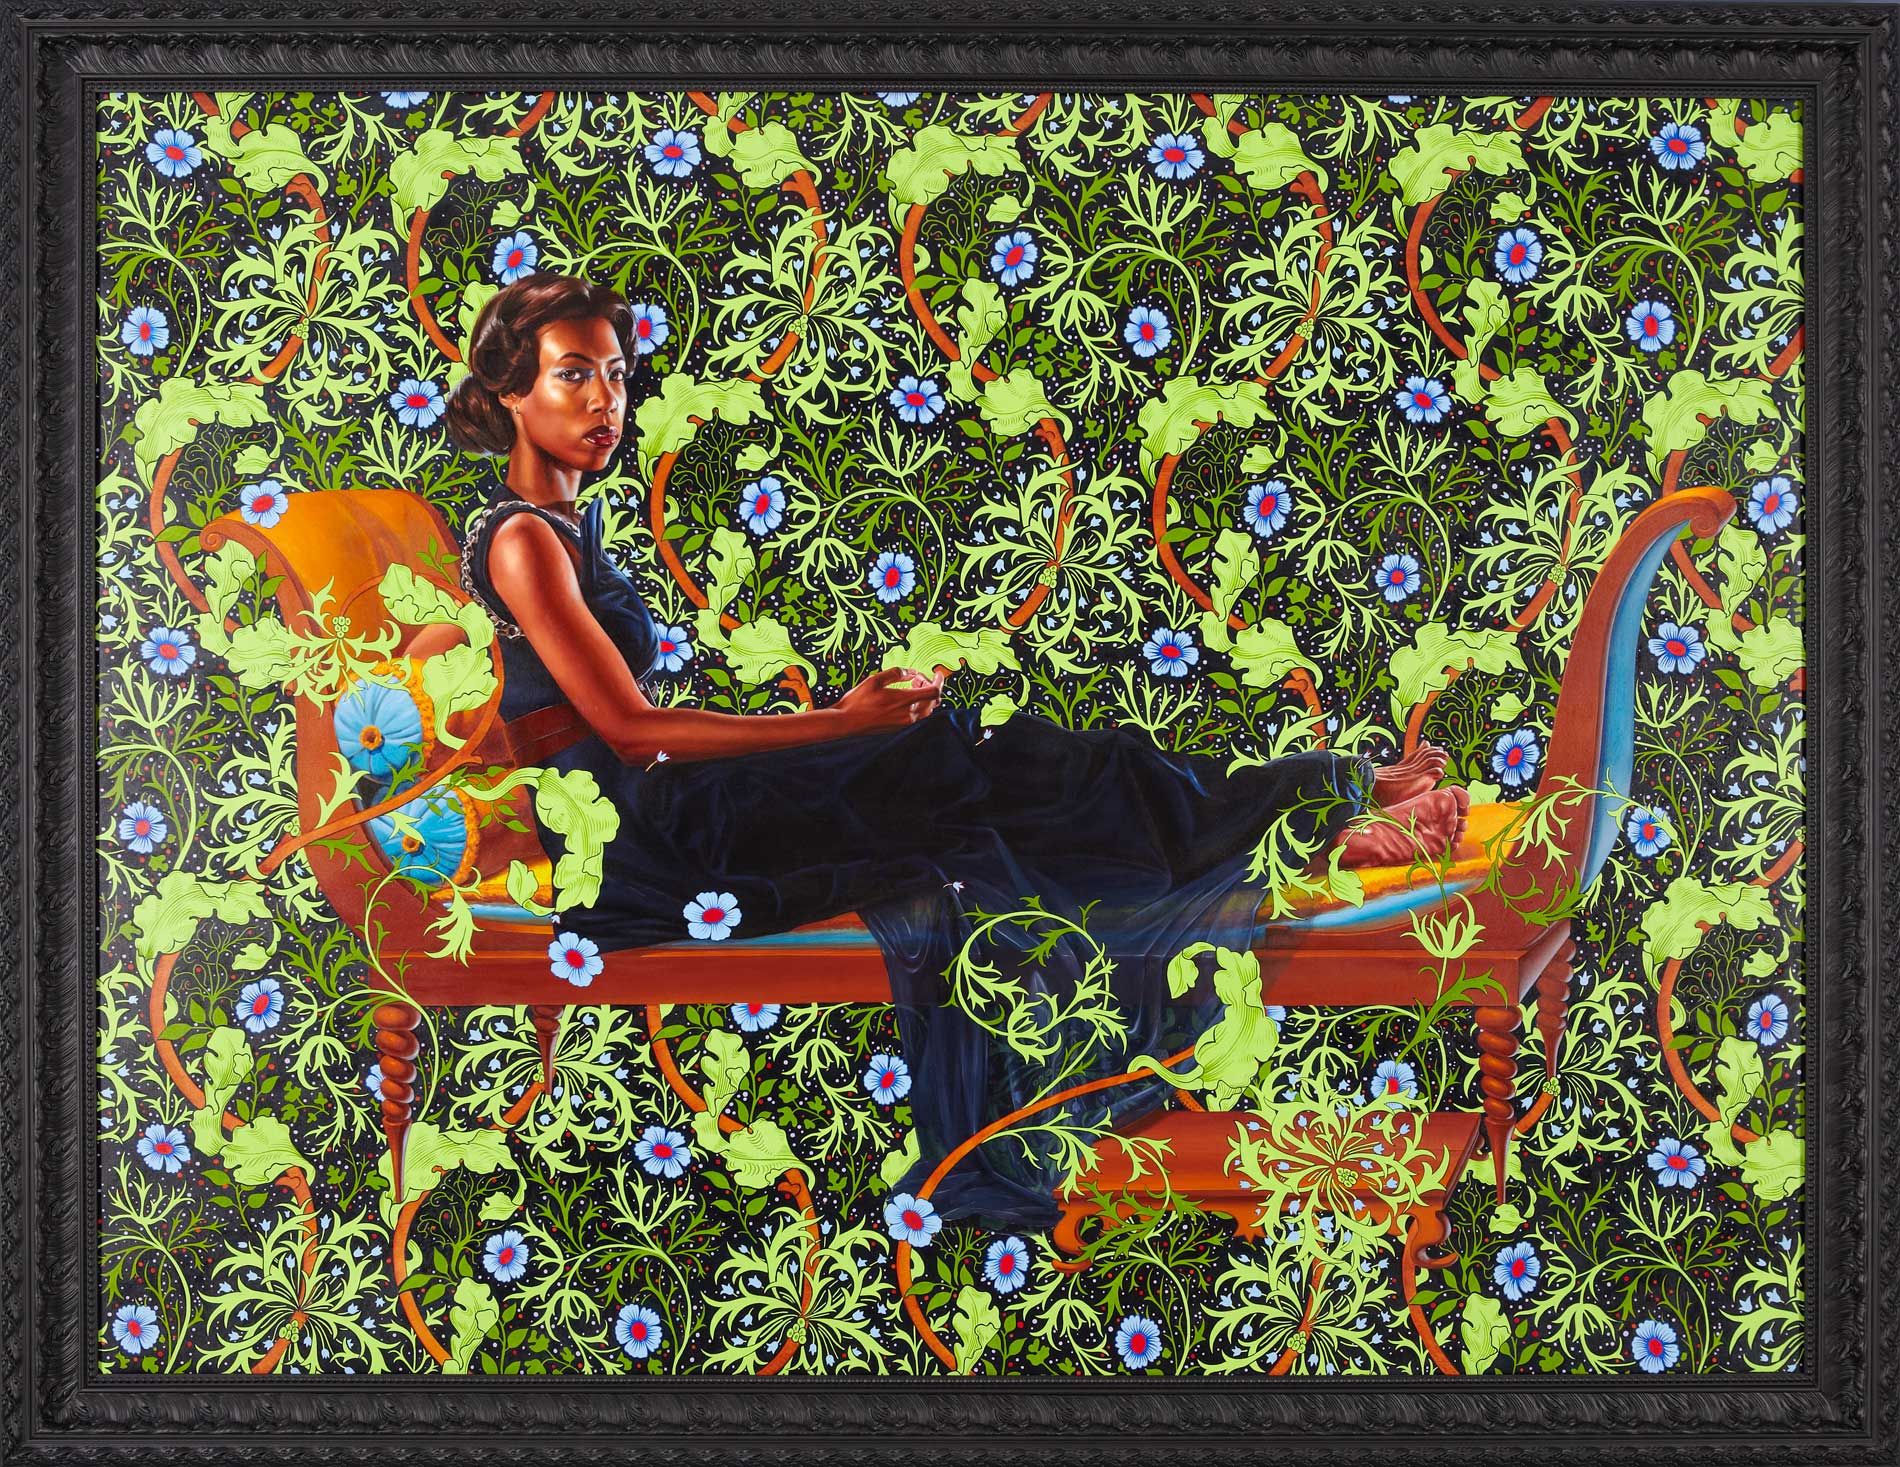 Kehinde Wiley | An Economy of Grace | 8